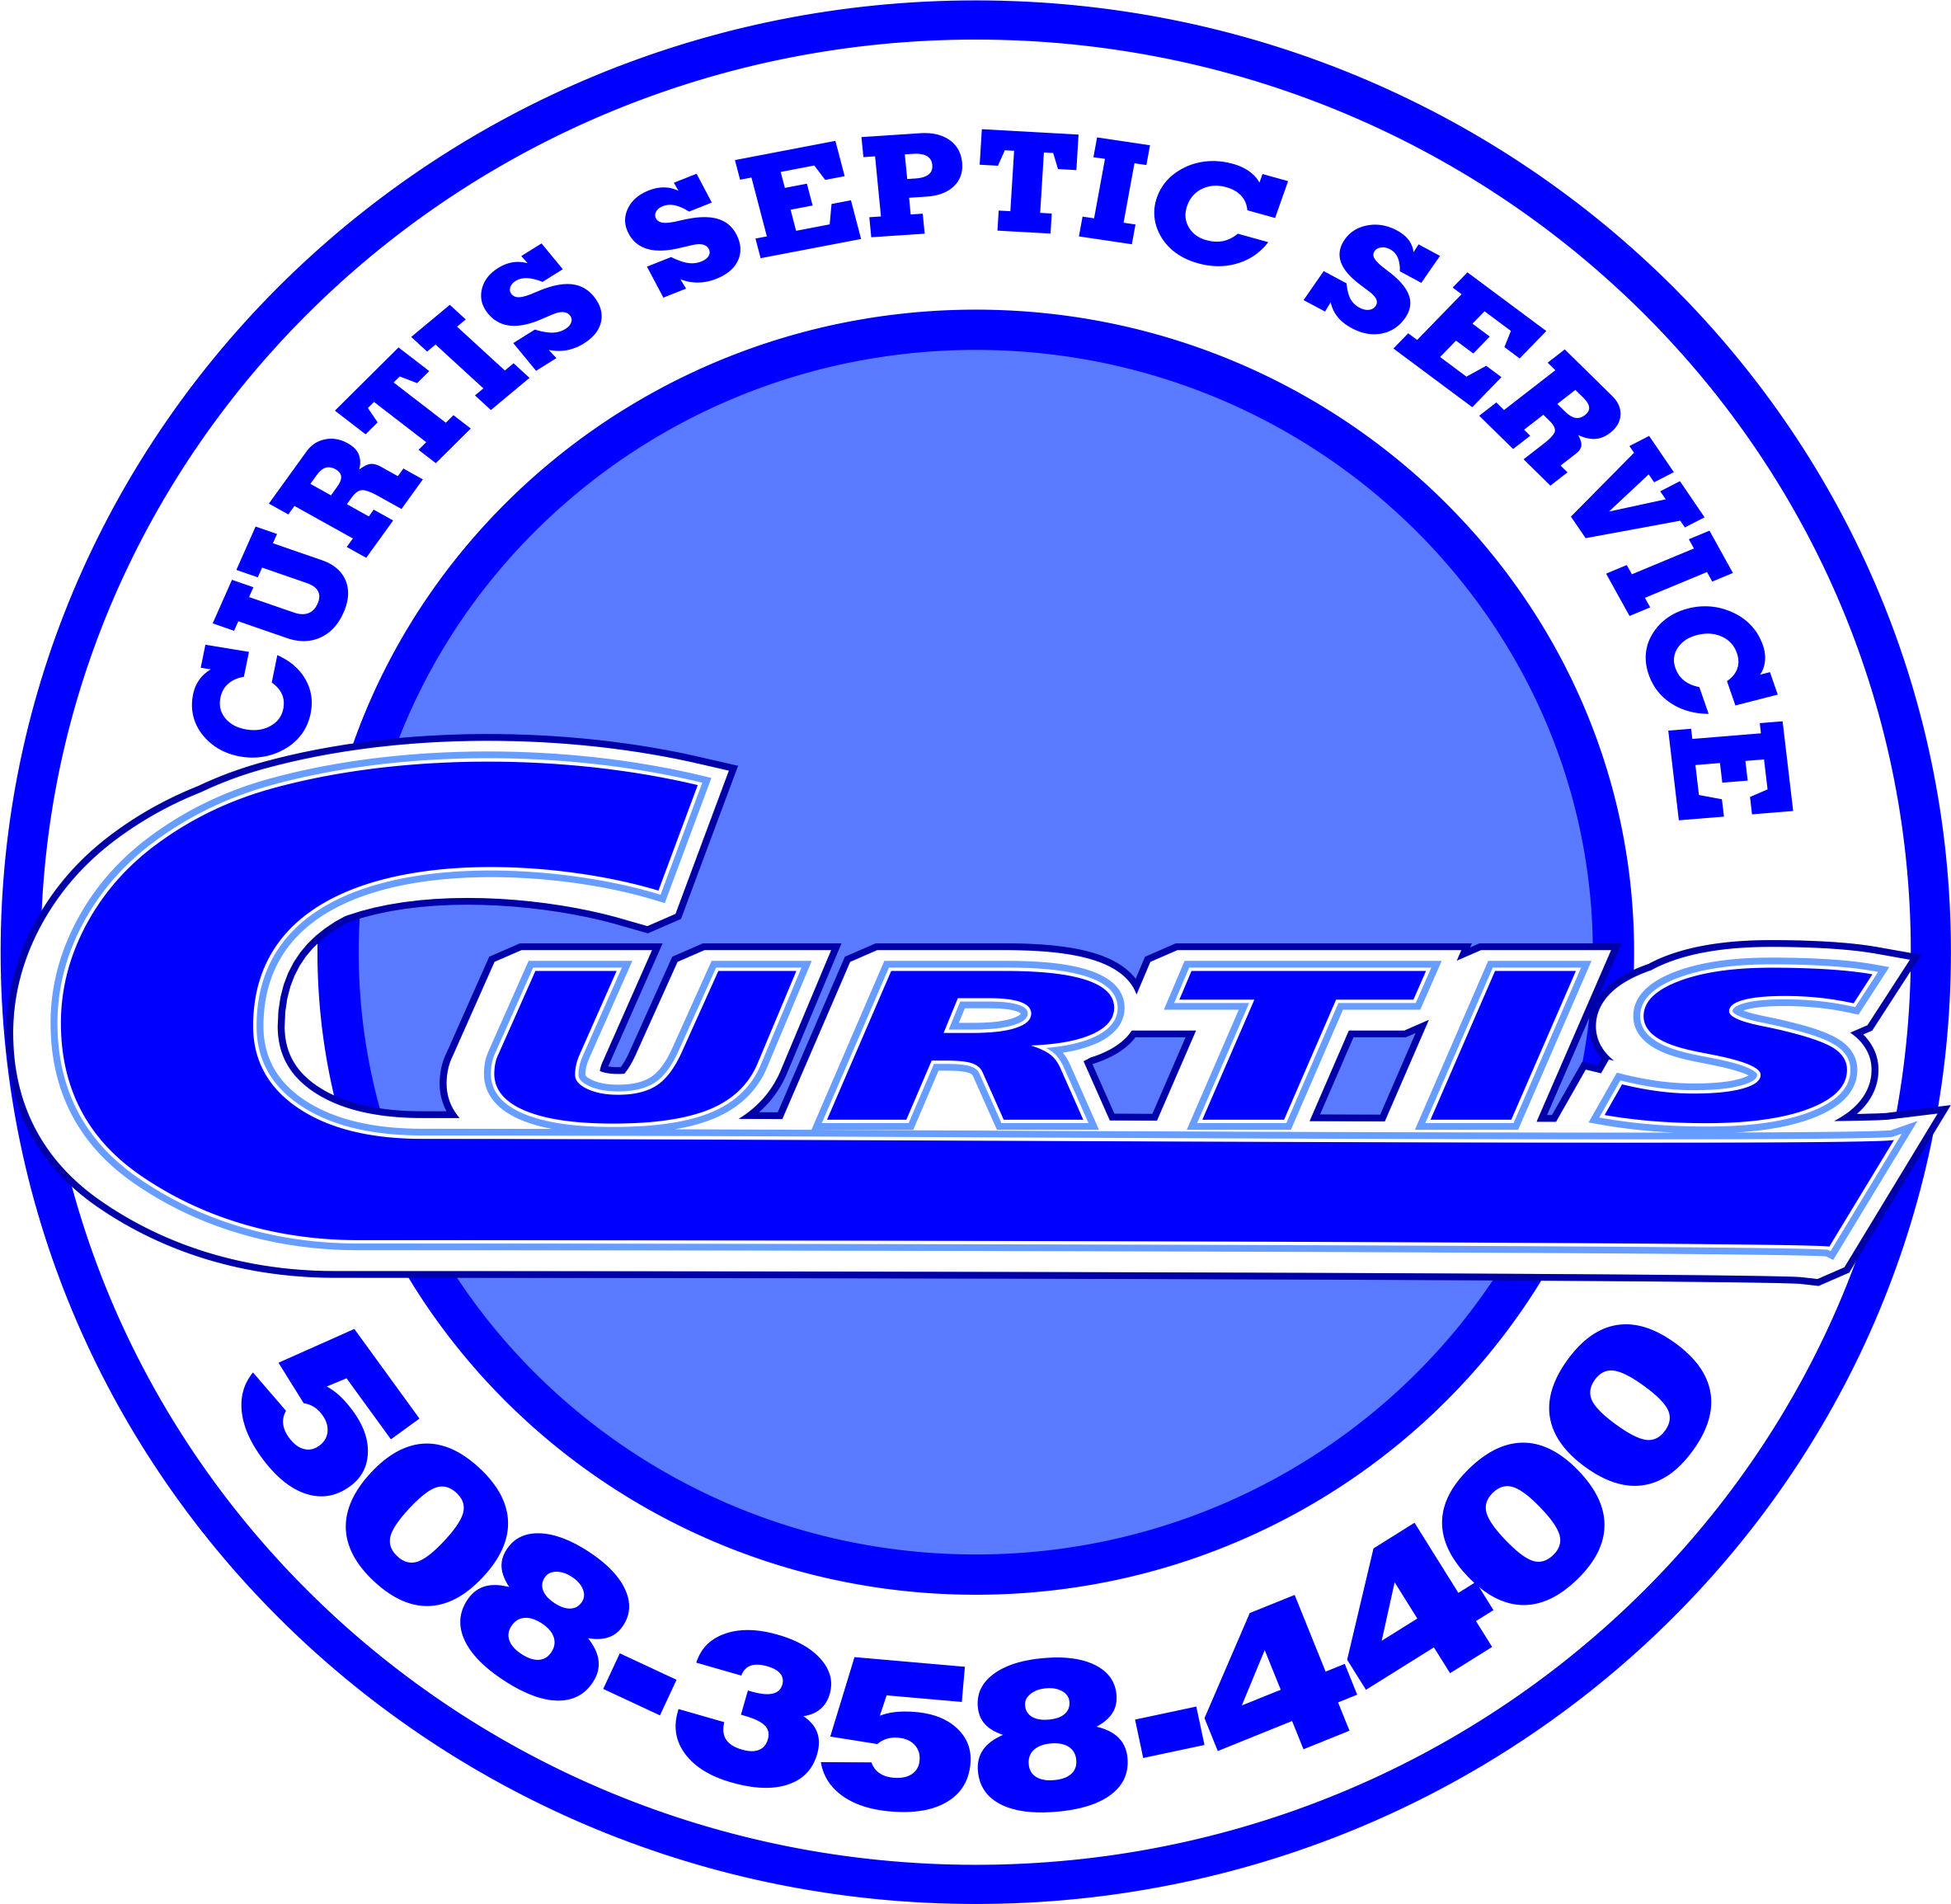 Residential and commercial septic system in Clinton Massachusetts